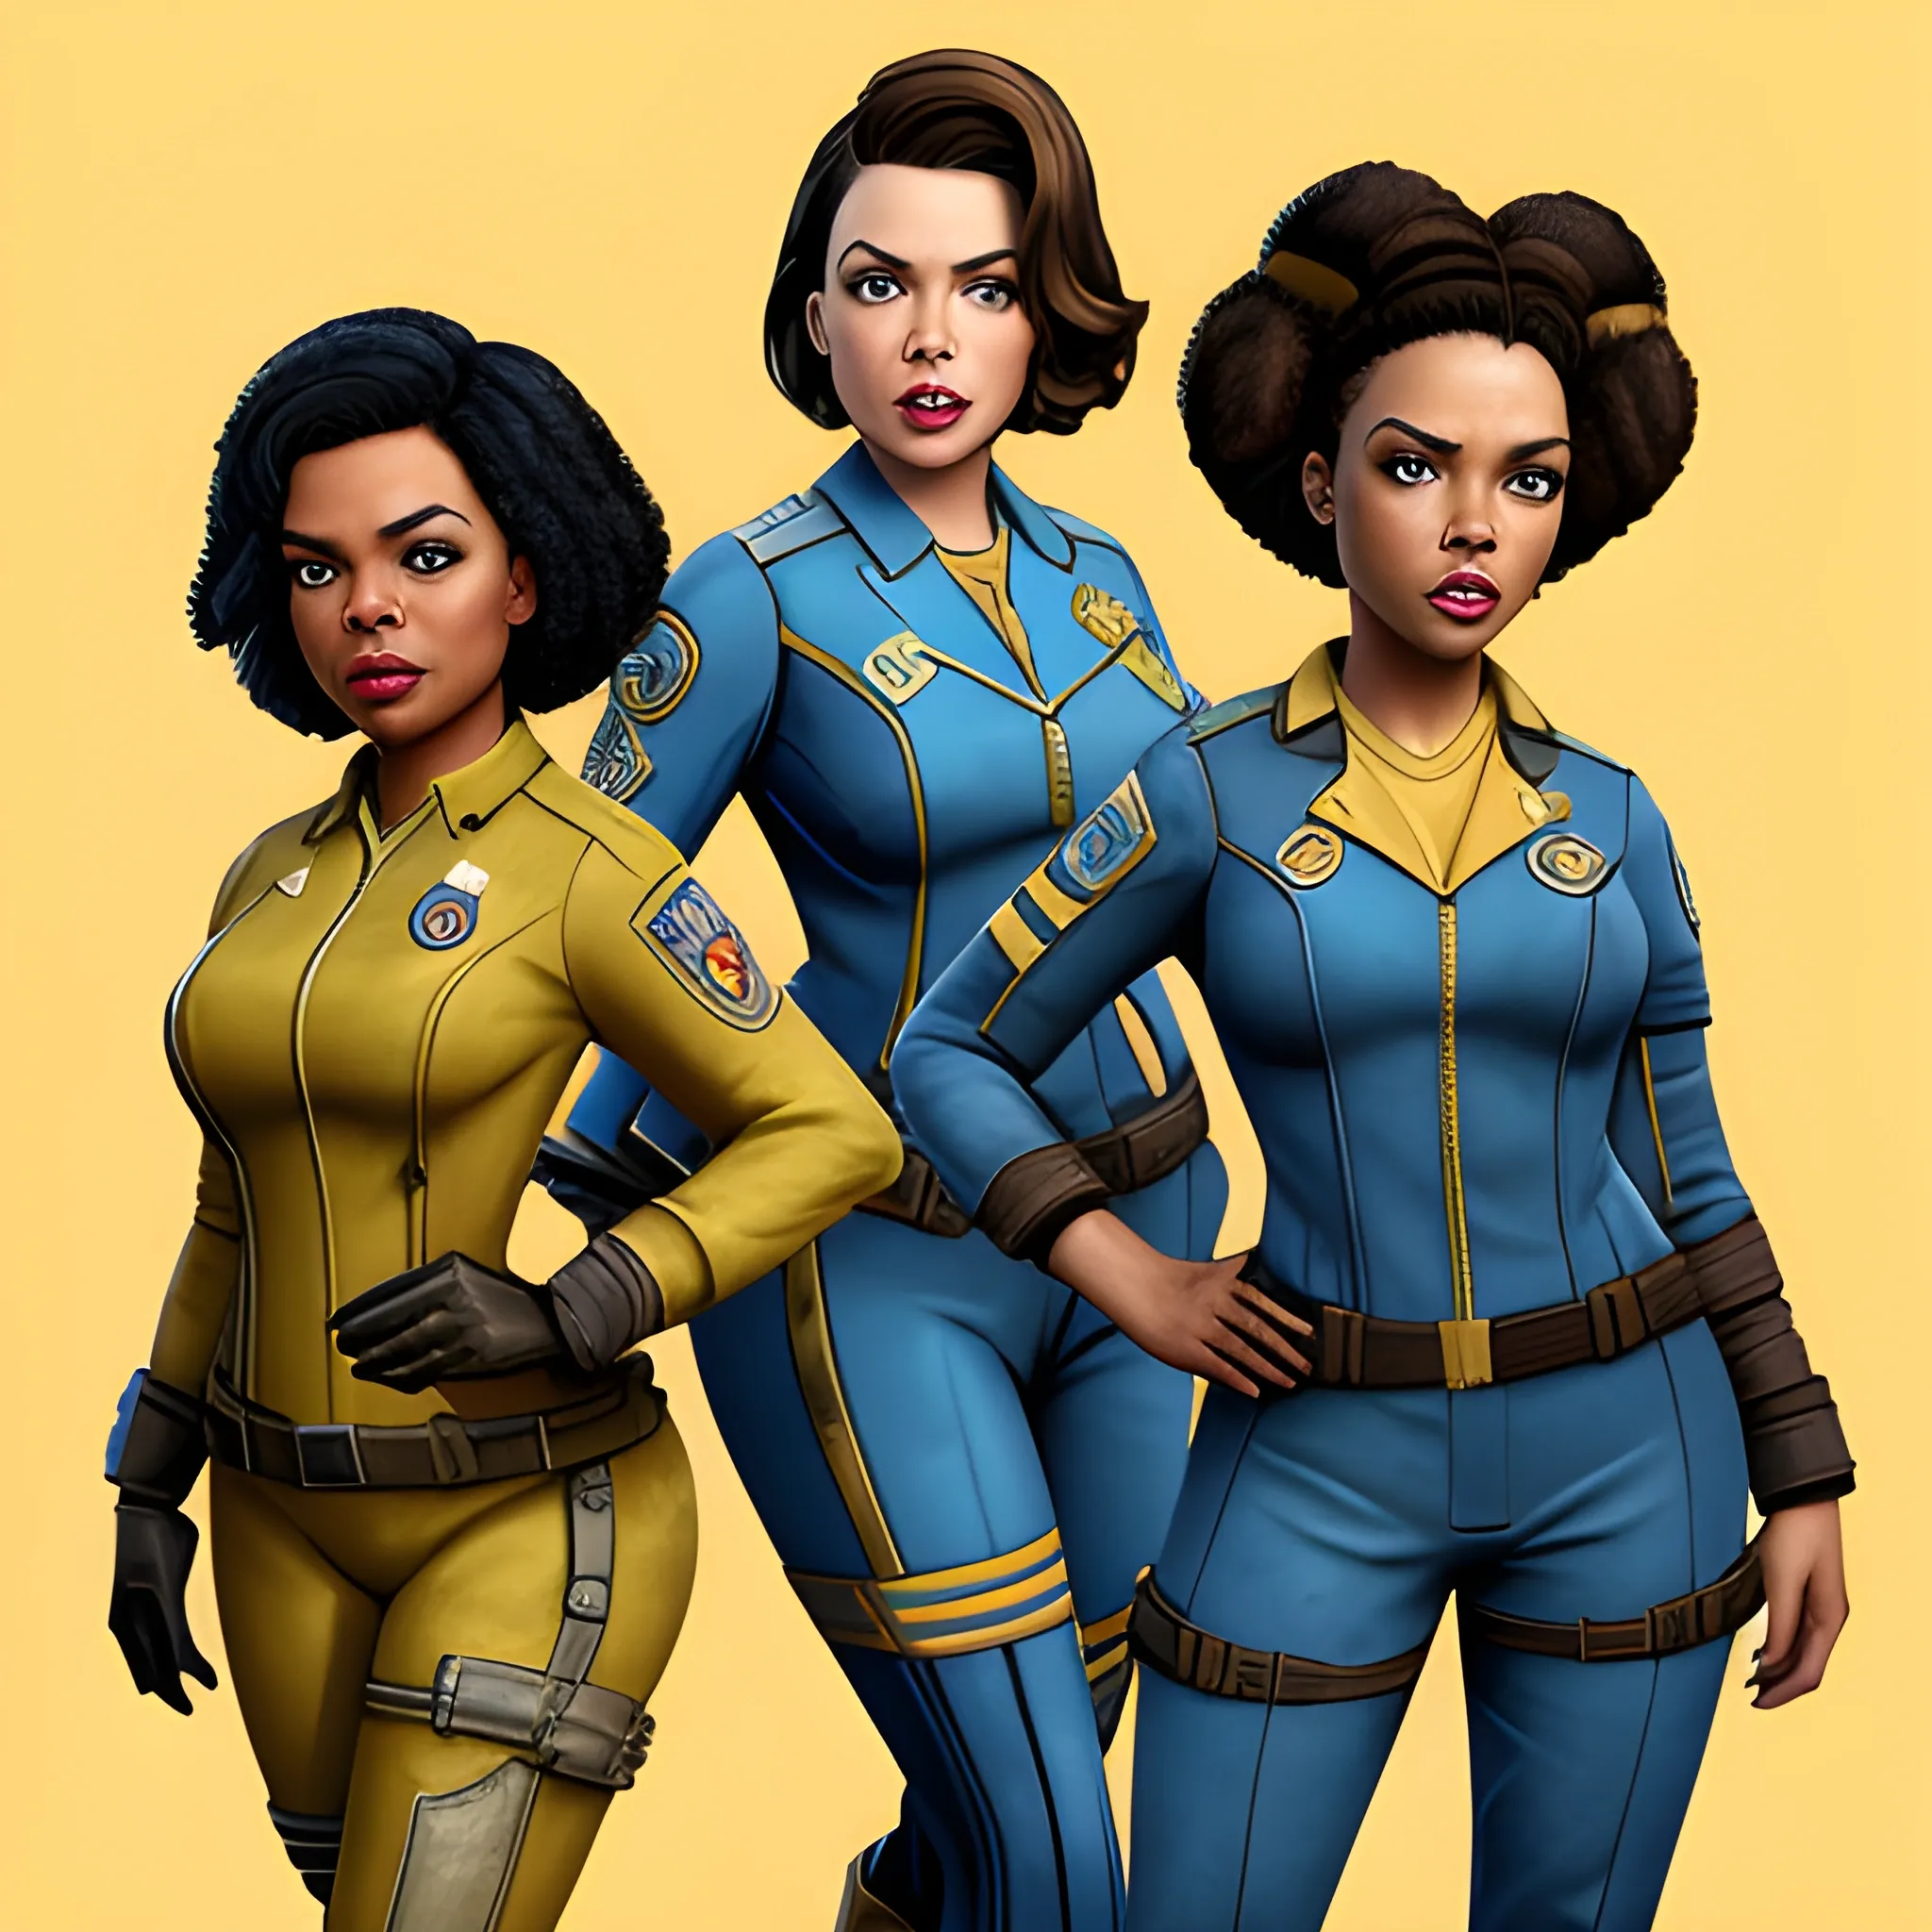 In the style of Fallout New Vegas, masterpiece, Yvette Nicole Brown and Allison Brie and and Gillian Jacobs as vault dwellers in blue vault suits